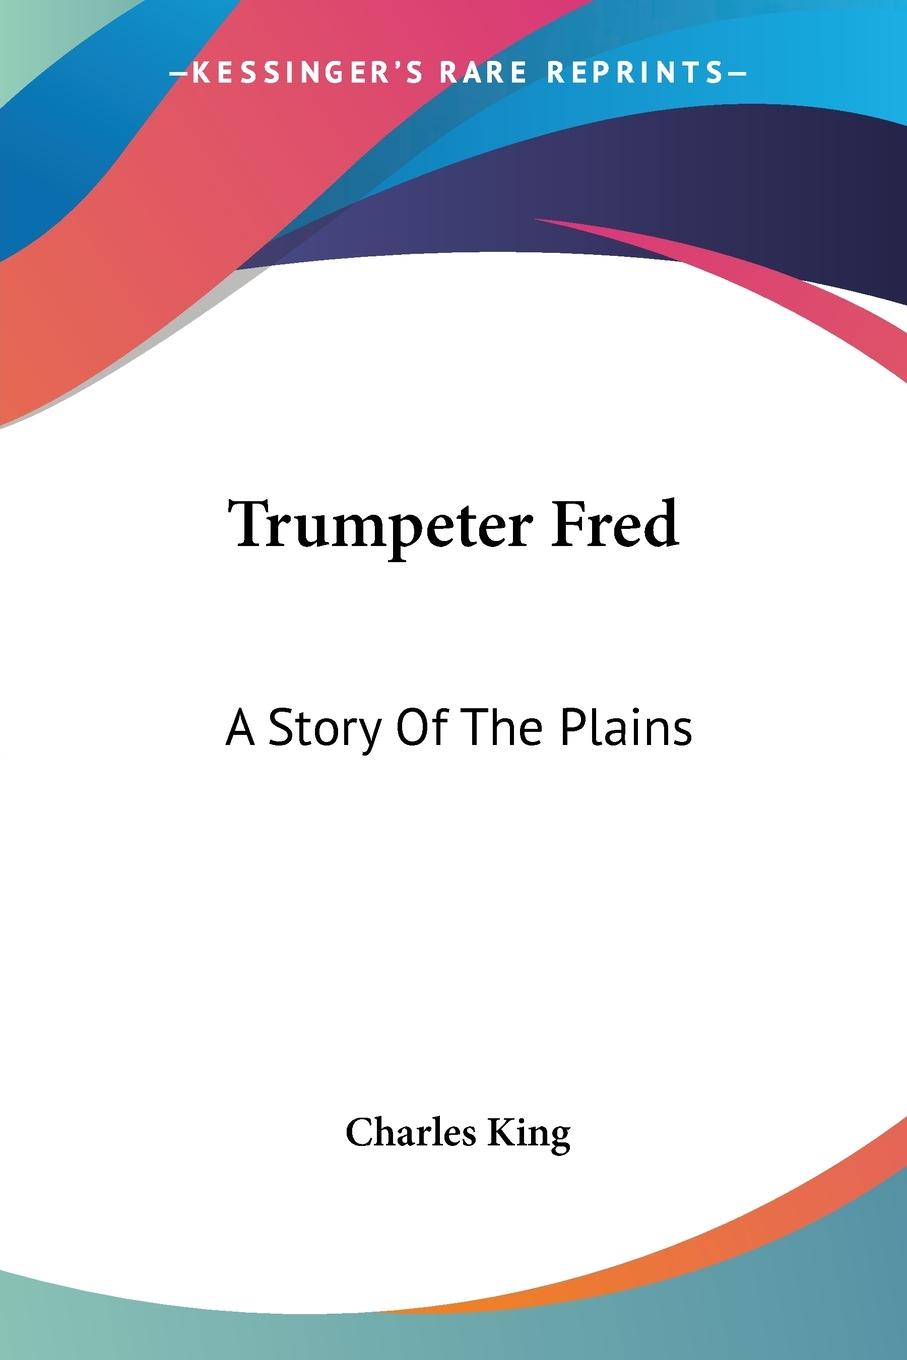 Trumpeter Fred - King, Charles